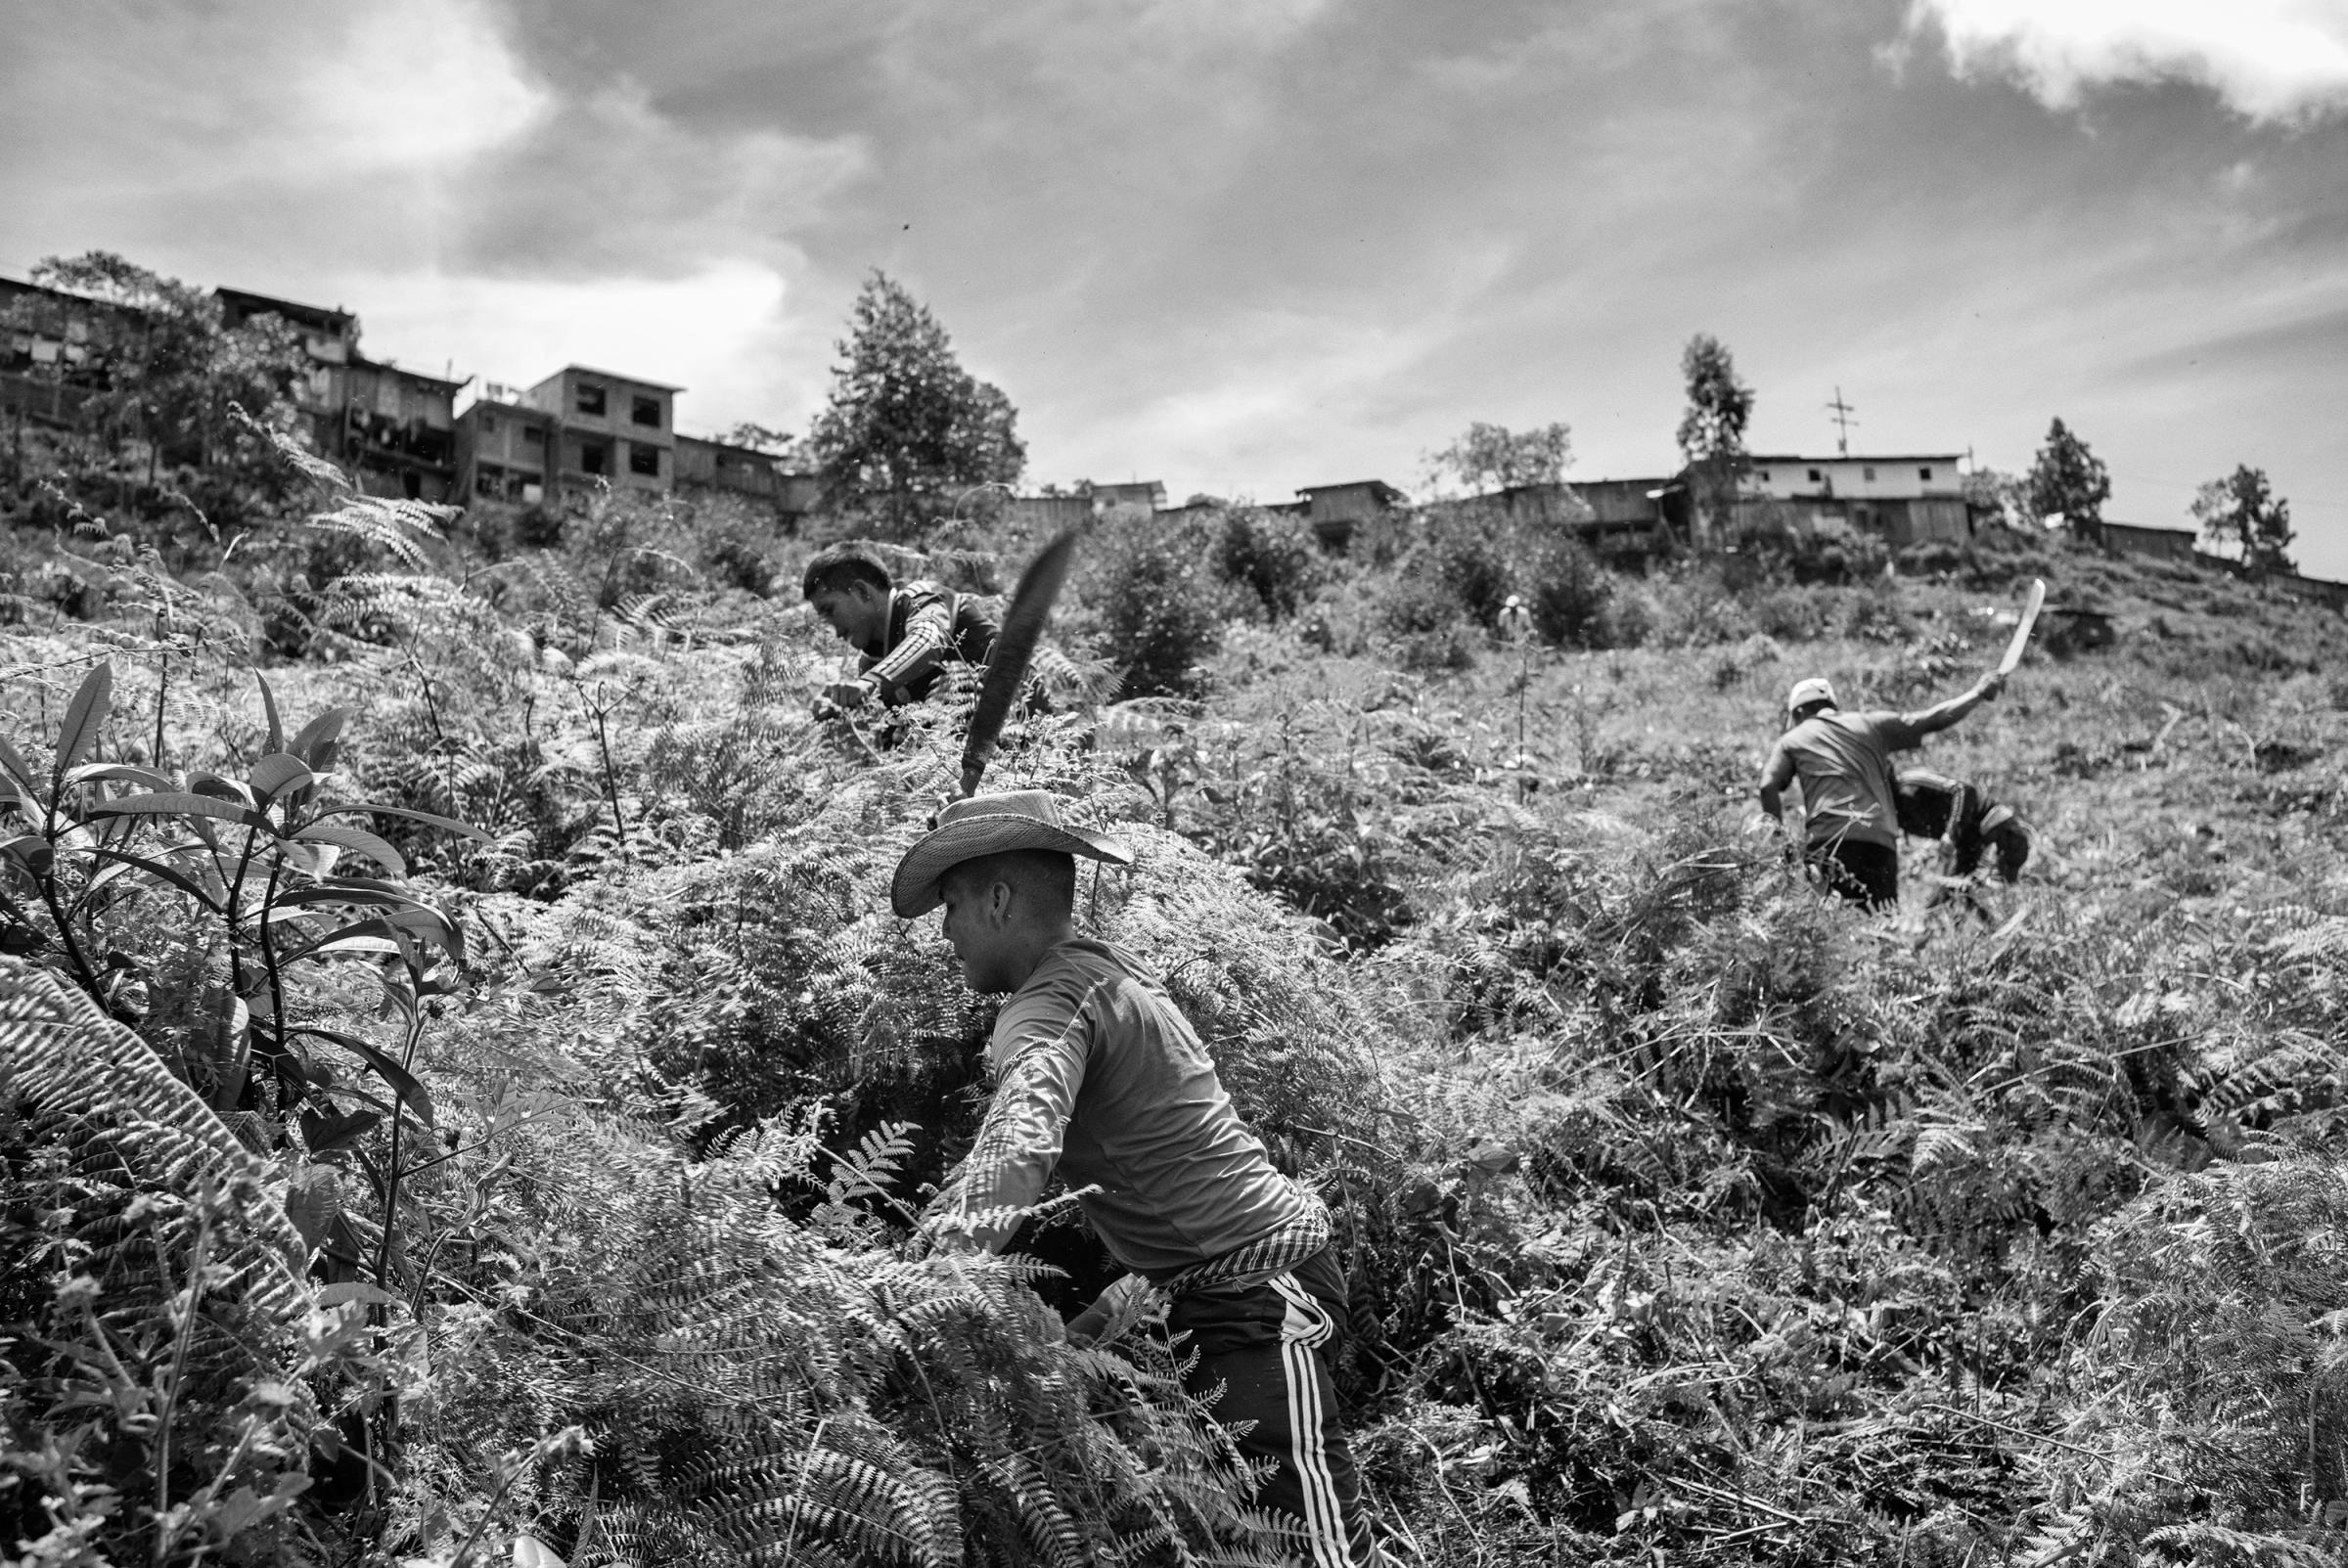 A group of FARC guerrillas and civilians perform community work in the community Robles Cauca, Colombia, July 2016. Many regions in Colombia have lived for 52 years under the control of FARC as the only authority. The peace agreement reached Aug. 24, 2016, has raised doubts and fears among civilians about the future that awaits their communities neglected by the state.